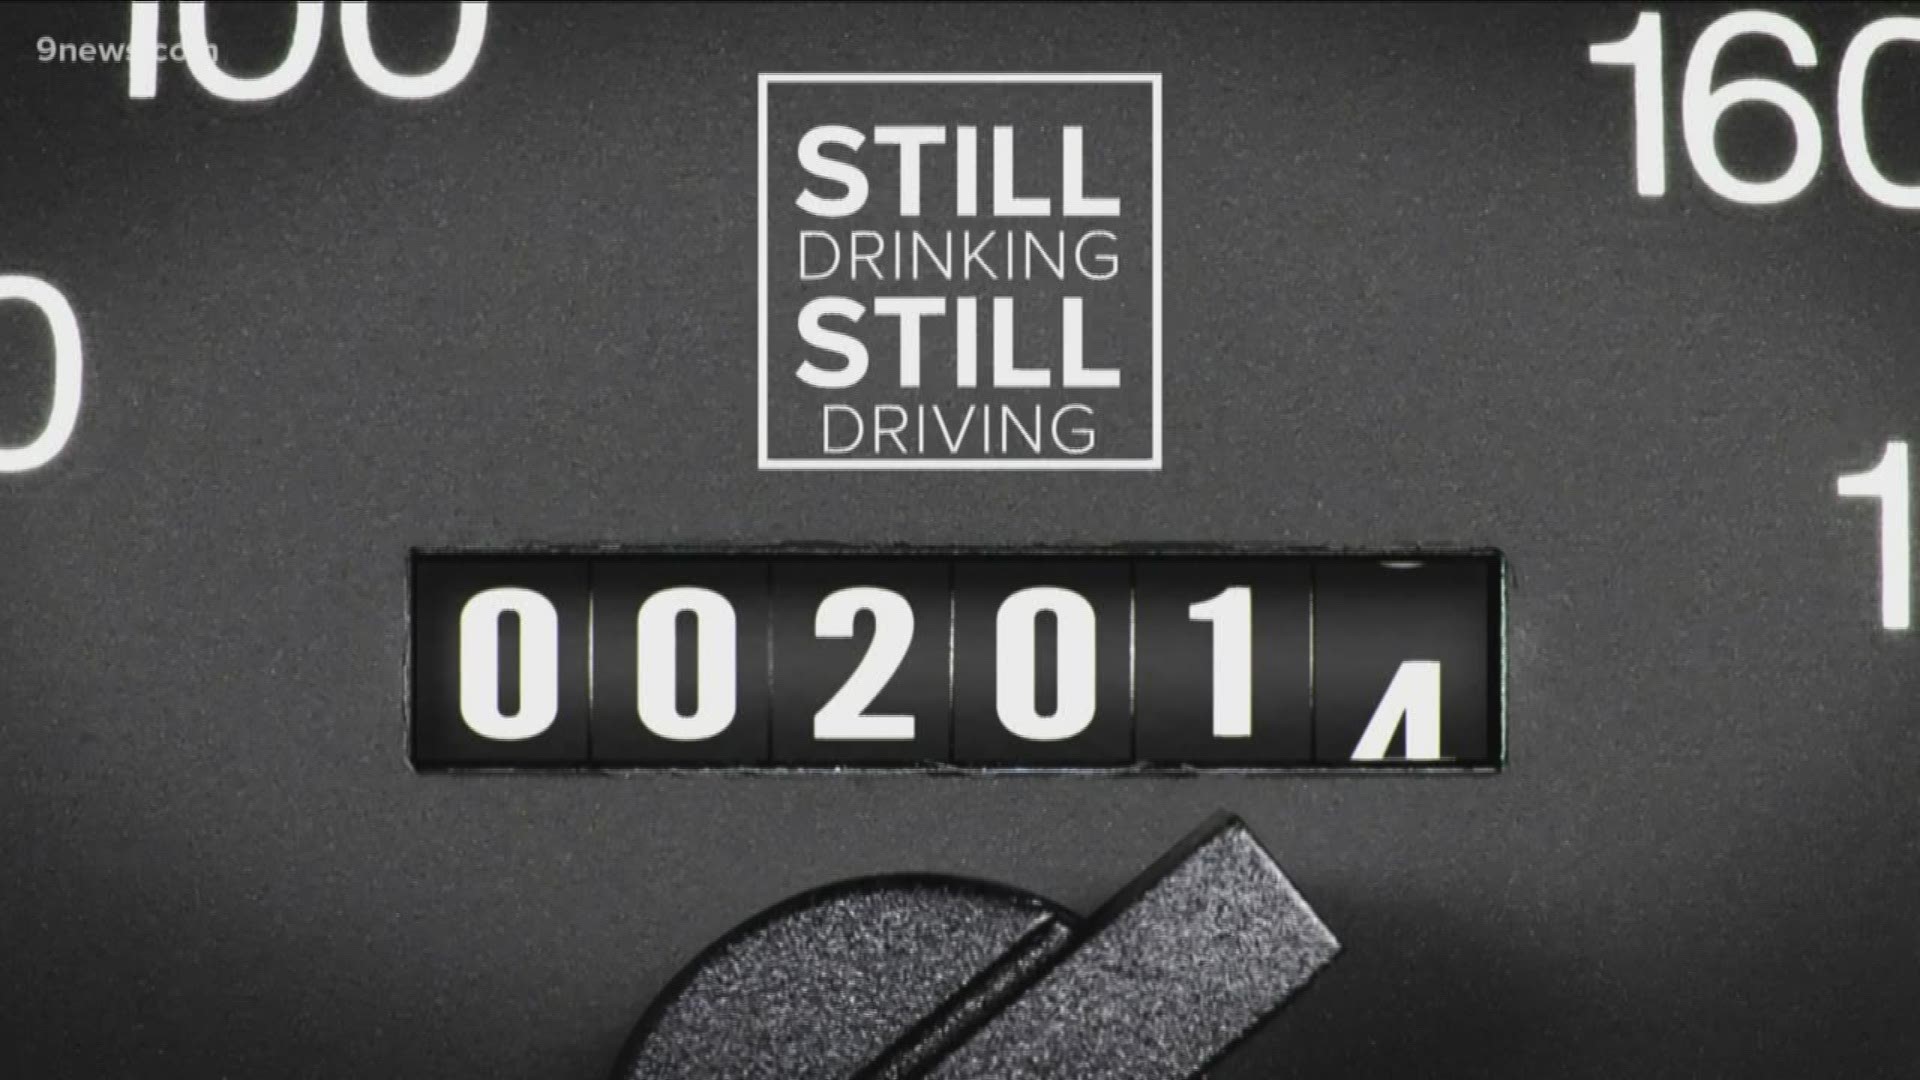 A 9Wants to Know investigation exposes loopholes in a 2015 state law designed to put chronic drunk drivers in prison hoping to stem the tide of drunk driving deaths.